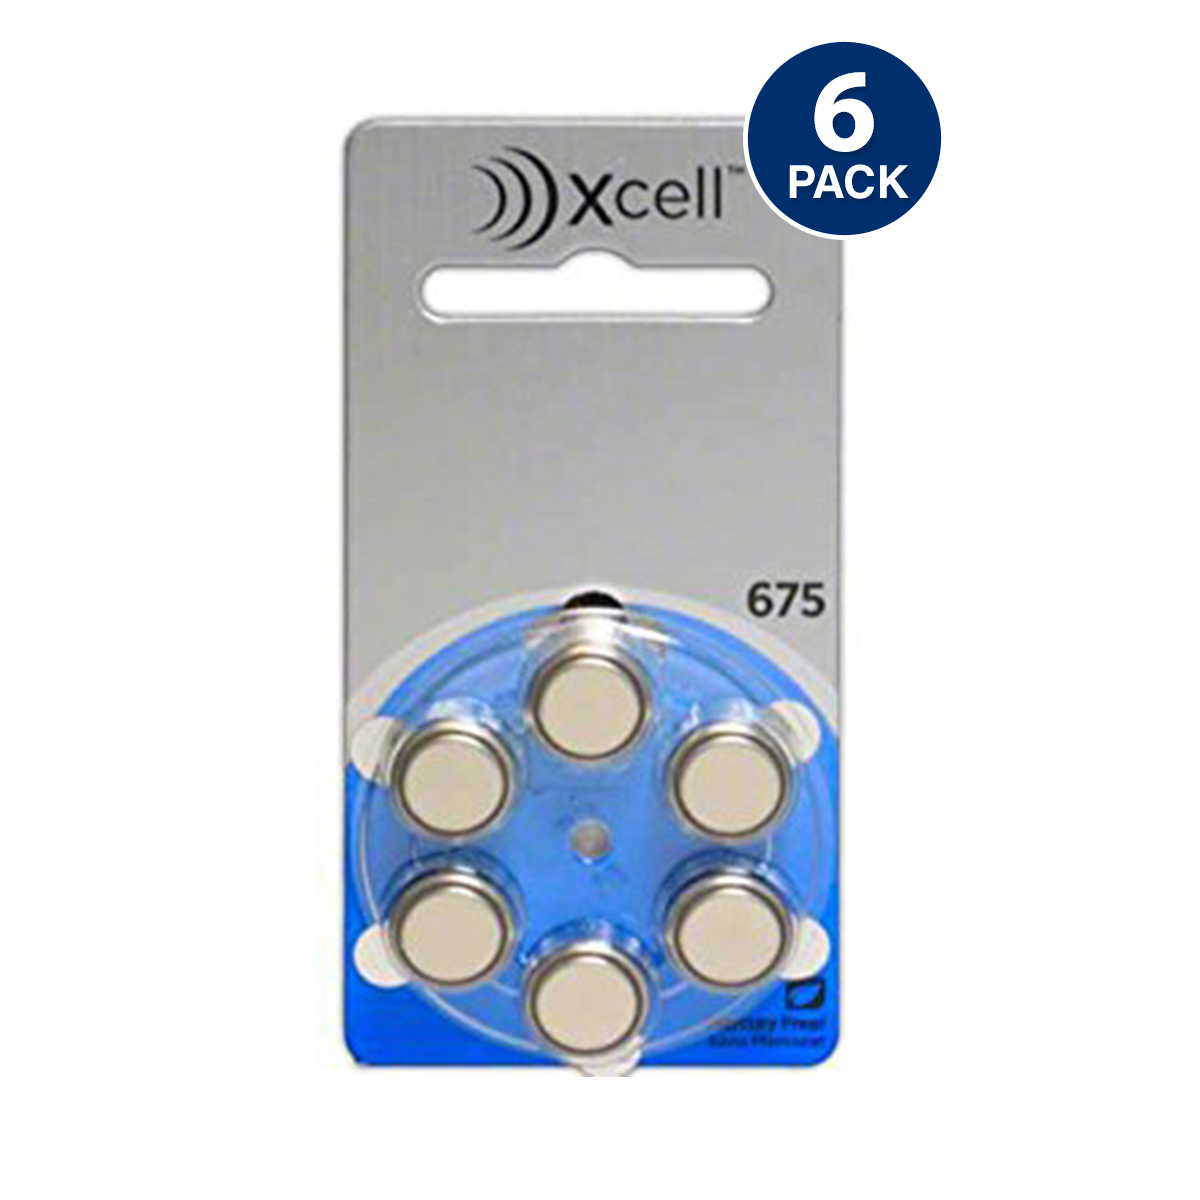 Xcell (Made By Rayovac) Mercury Free Hearing Aid Batteries, Size 675 (6 pcs)